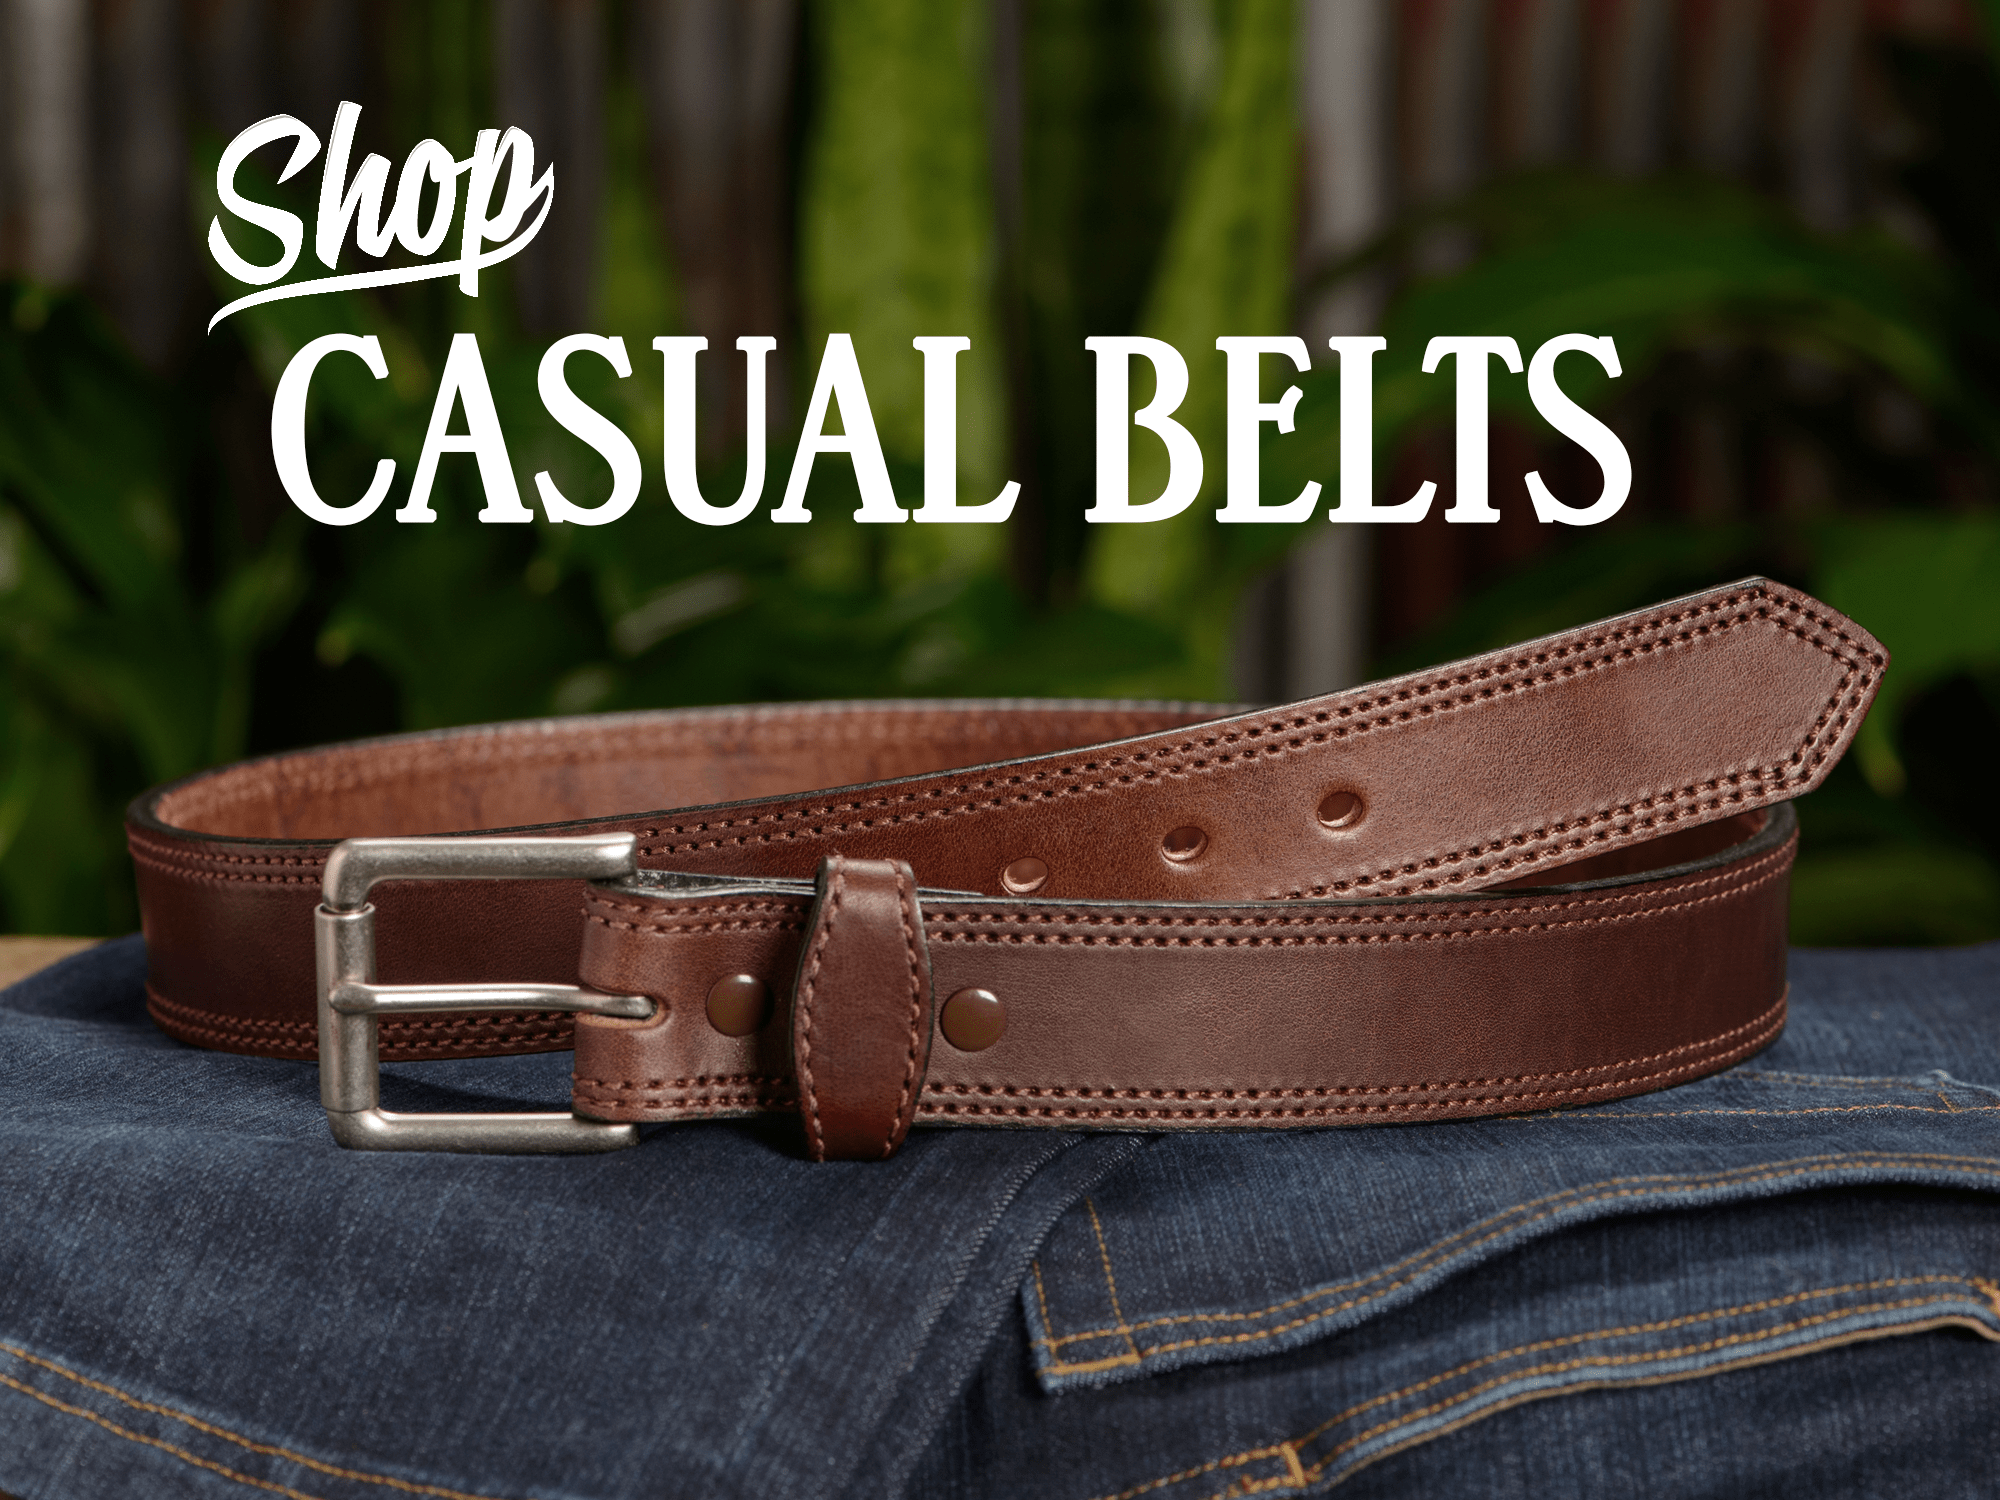 High Quality Handcrafted USA Made Work Belts | Bullhide Belts